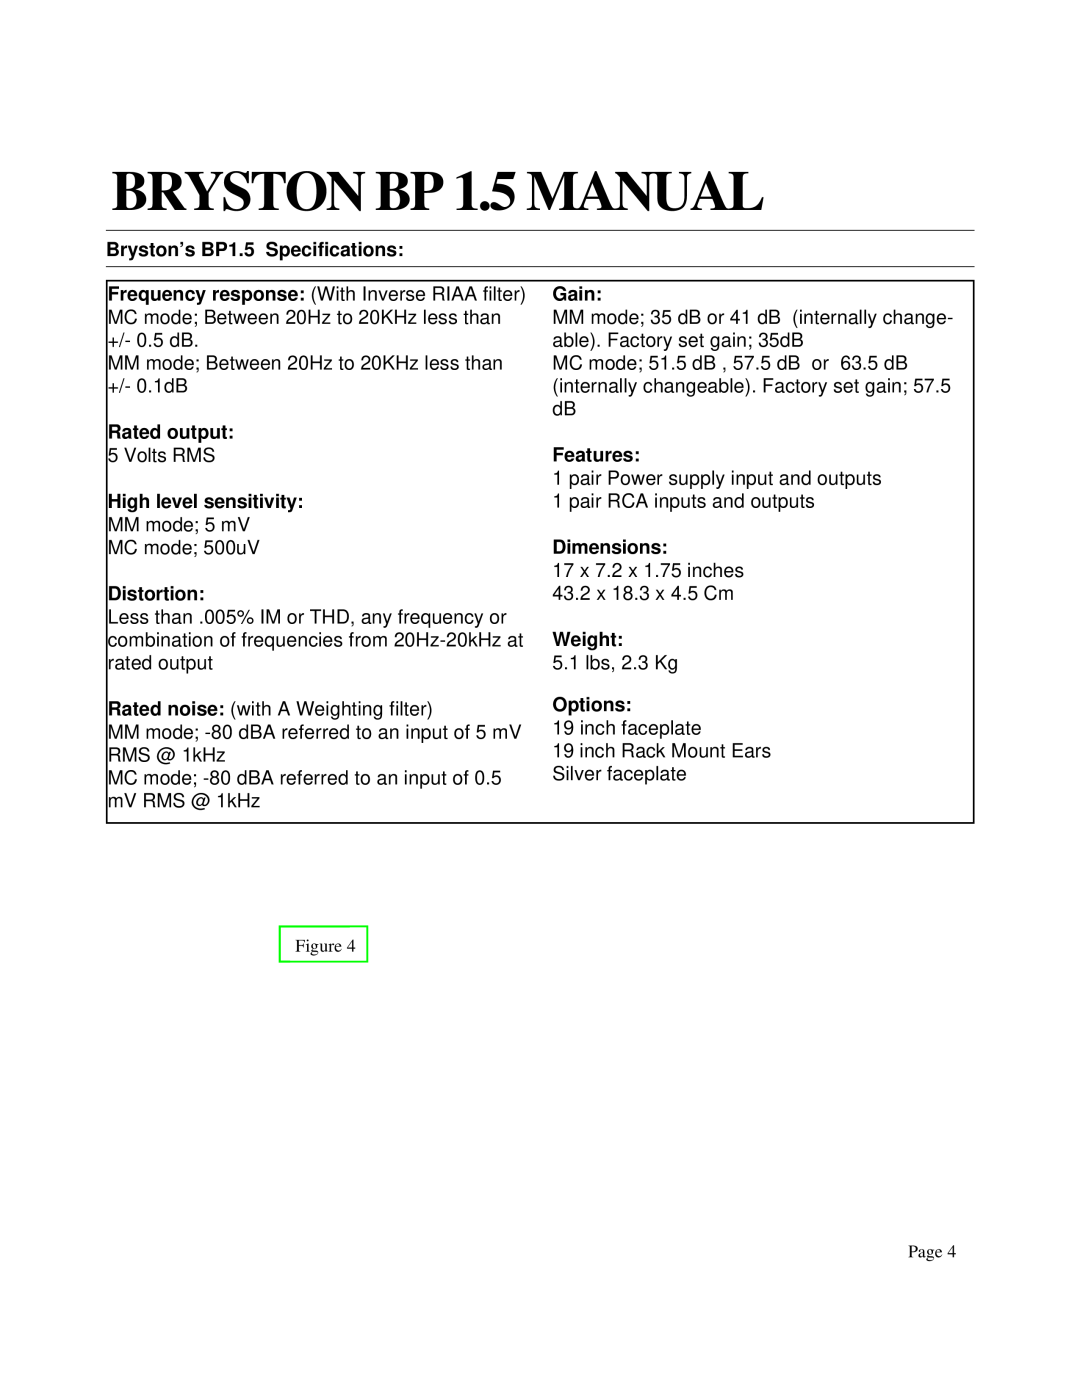 Bryston BP 1.5 Bryston’s BP1.5 Specifications, Gain, Rated output, Features, High level sensitivity, Dimensions, Weight 